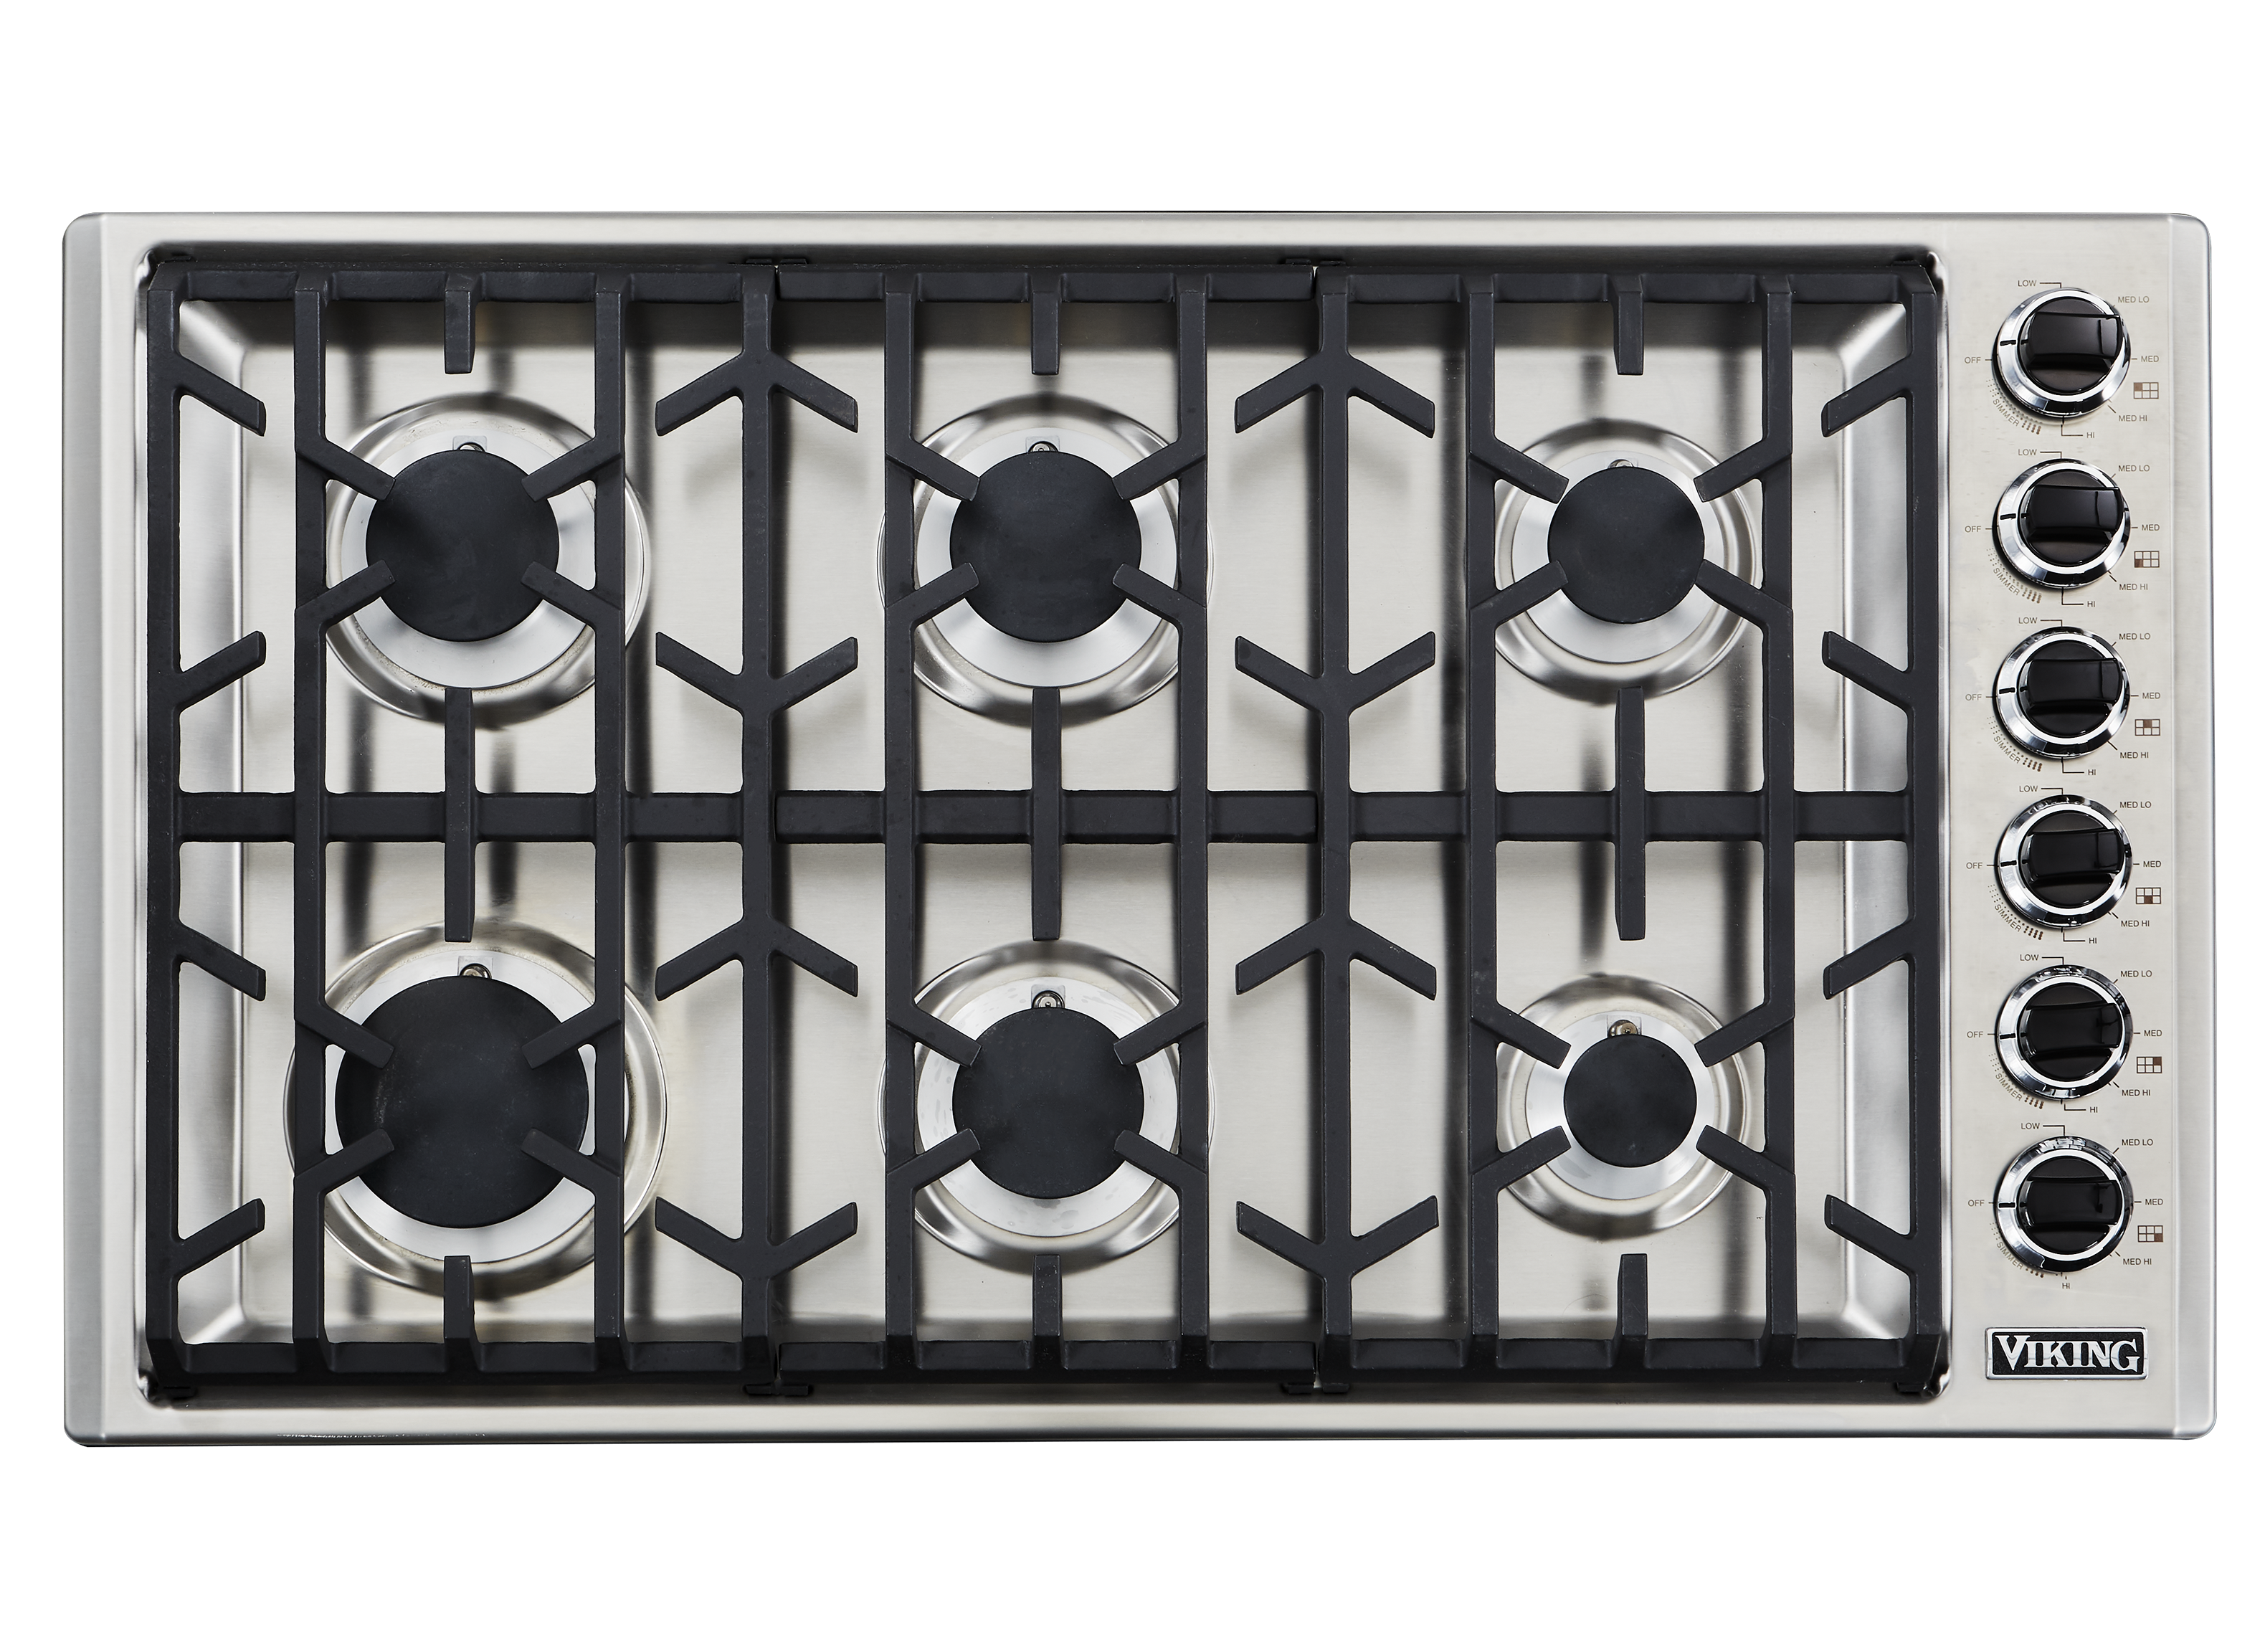 https://crdms.images.consumerreports.org/prod/products/cr/models/396211-36-inch-gas-cooktops-viking-vgsu53616bss-10000004.png